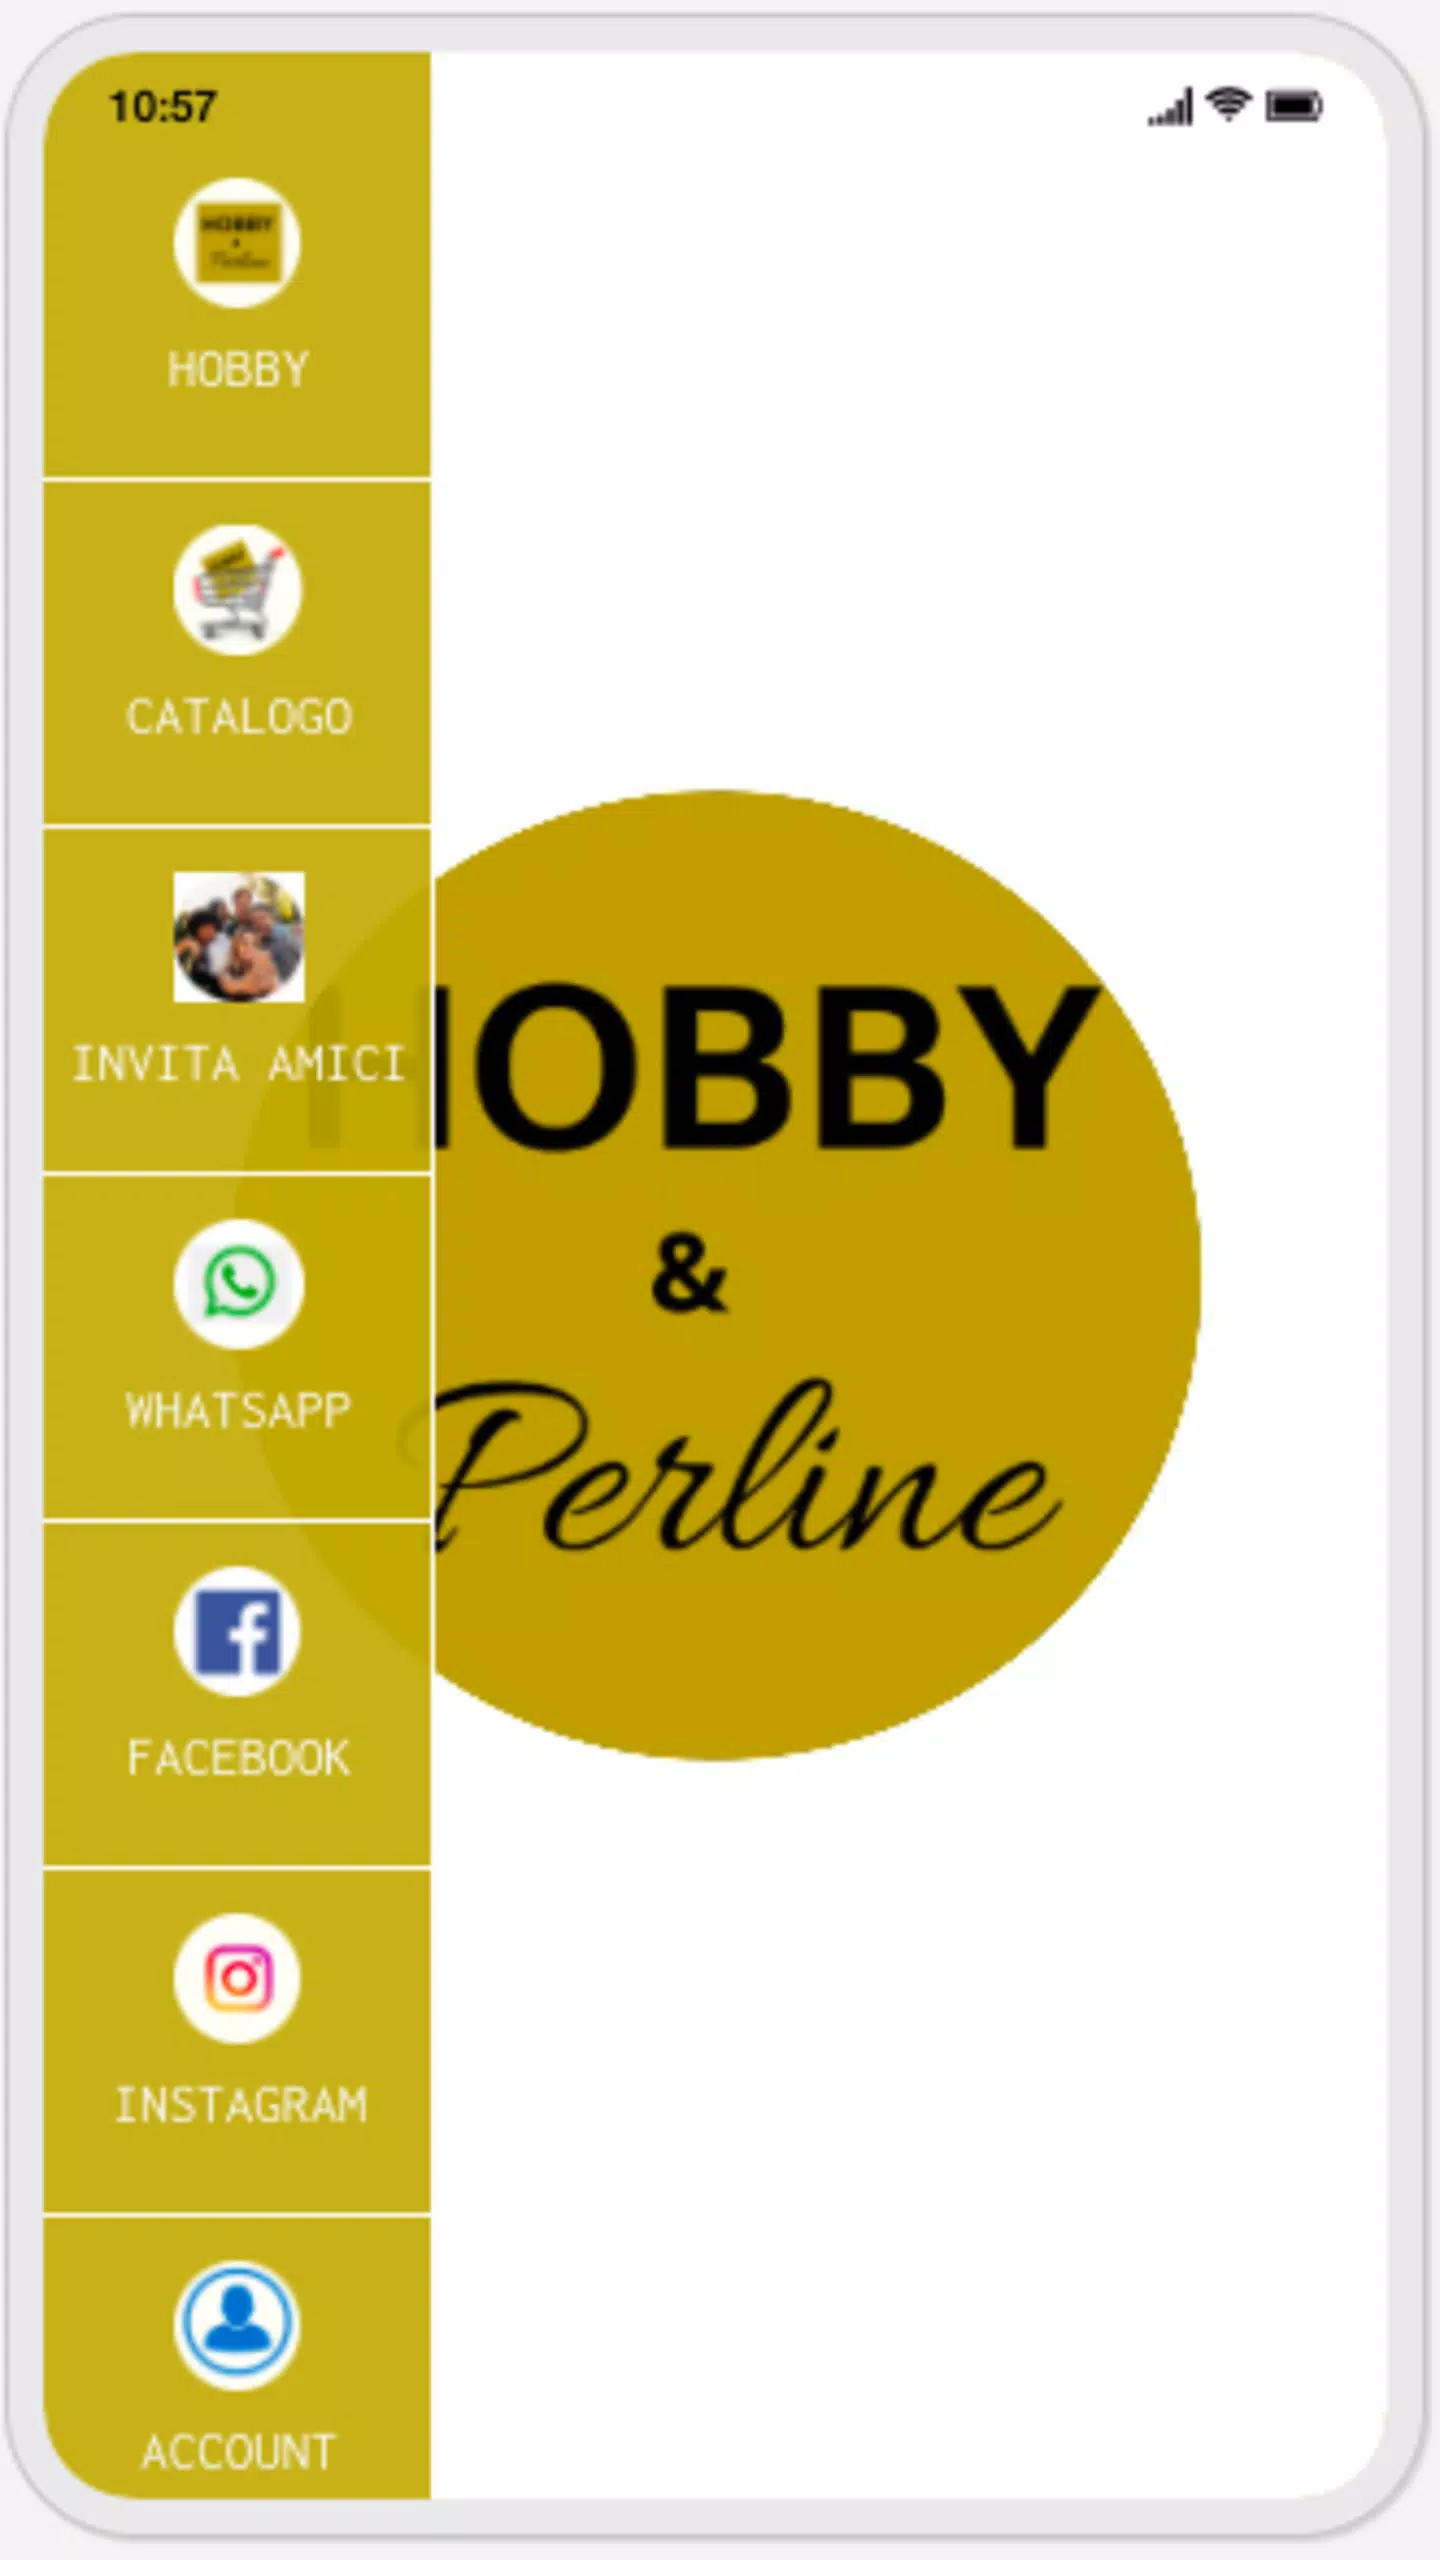 Hobby e Perline Milano for Android - APK Download